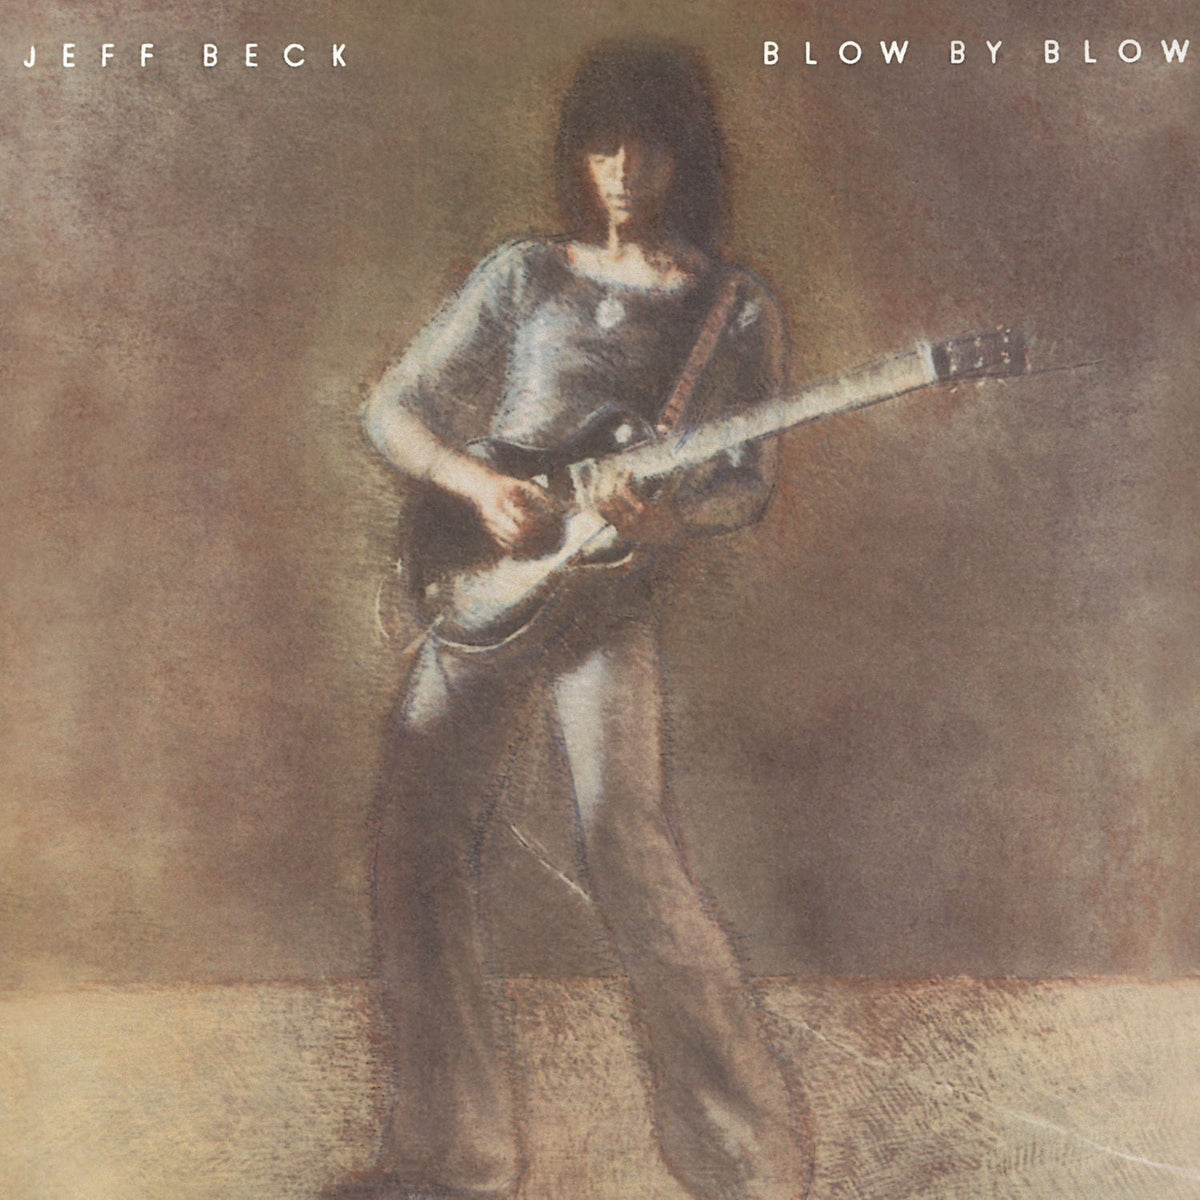 Jeff Beck - Blow by Blow (Music On Vinyl)